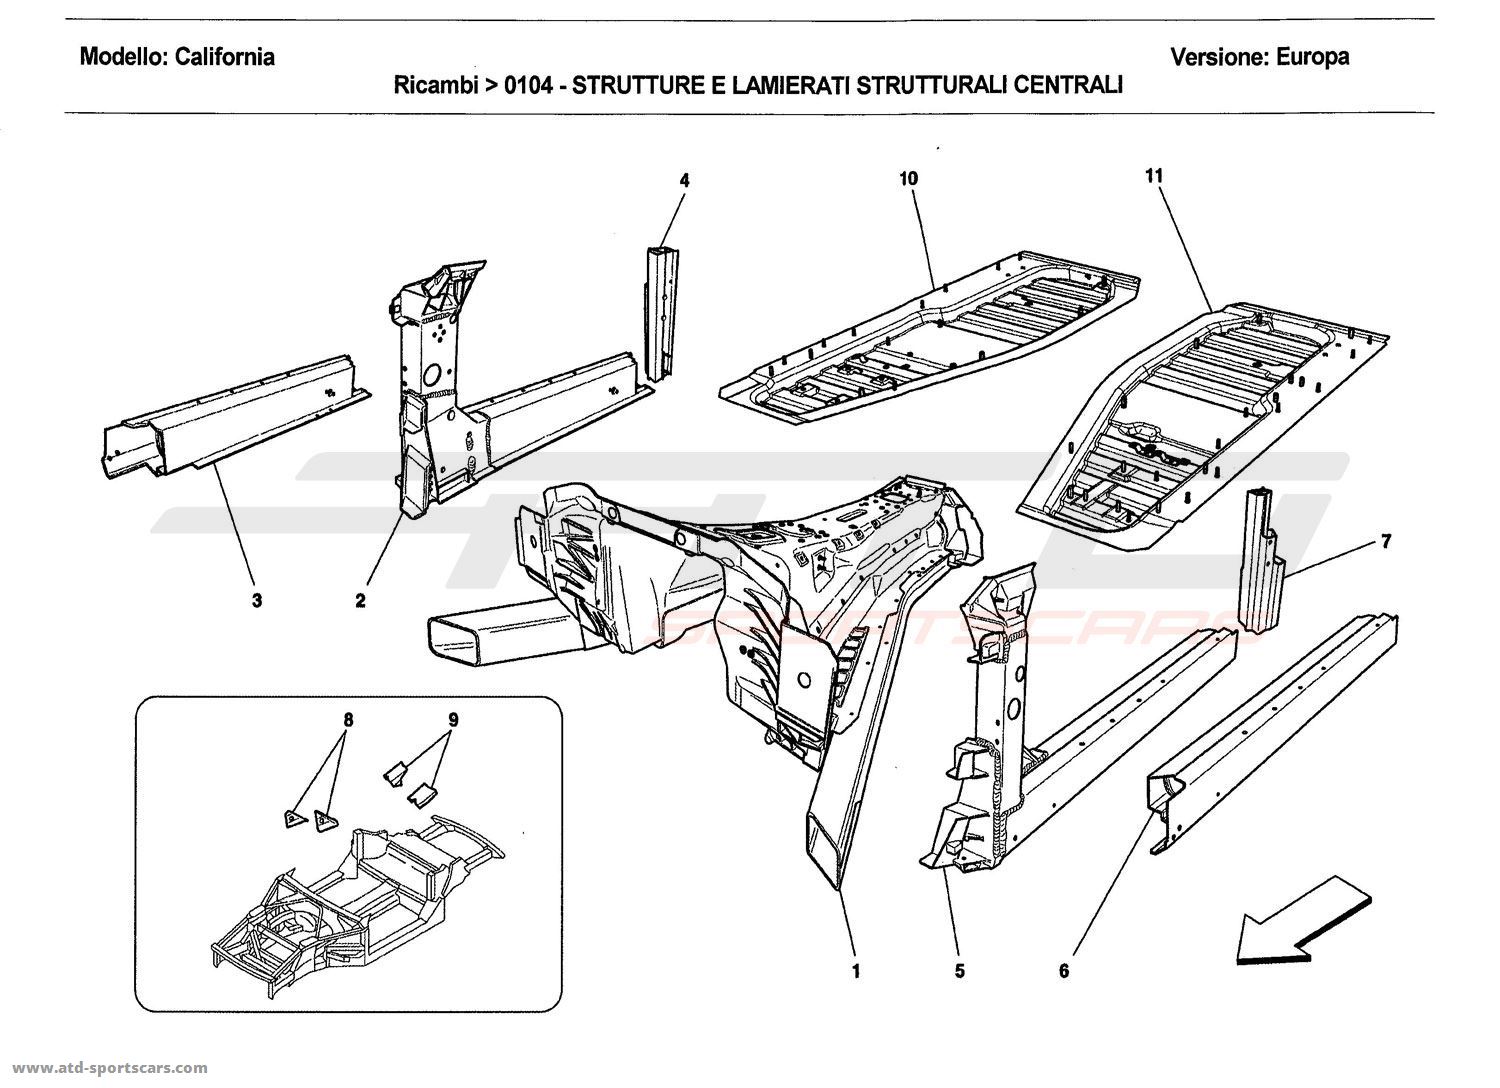 CENTRAL STRUCTURES AND CHASSIS BOX SECTIONS